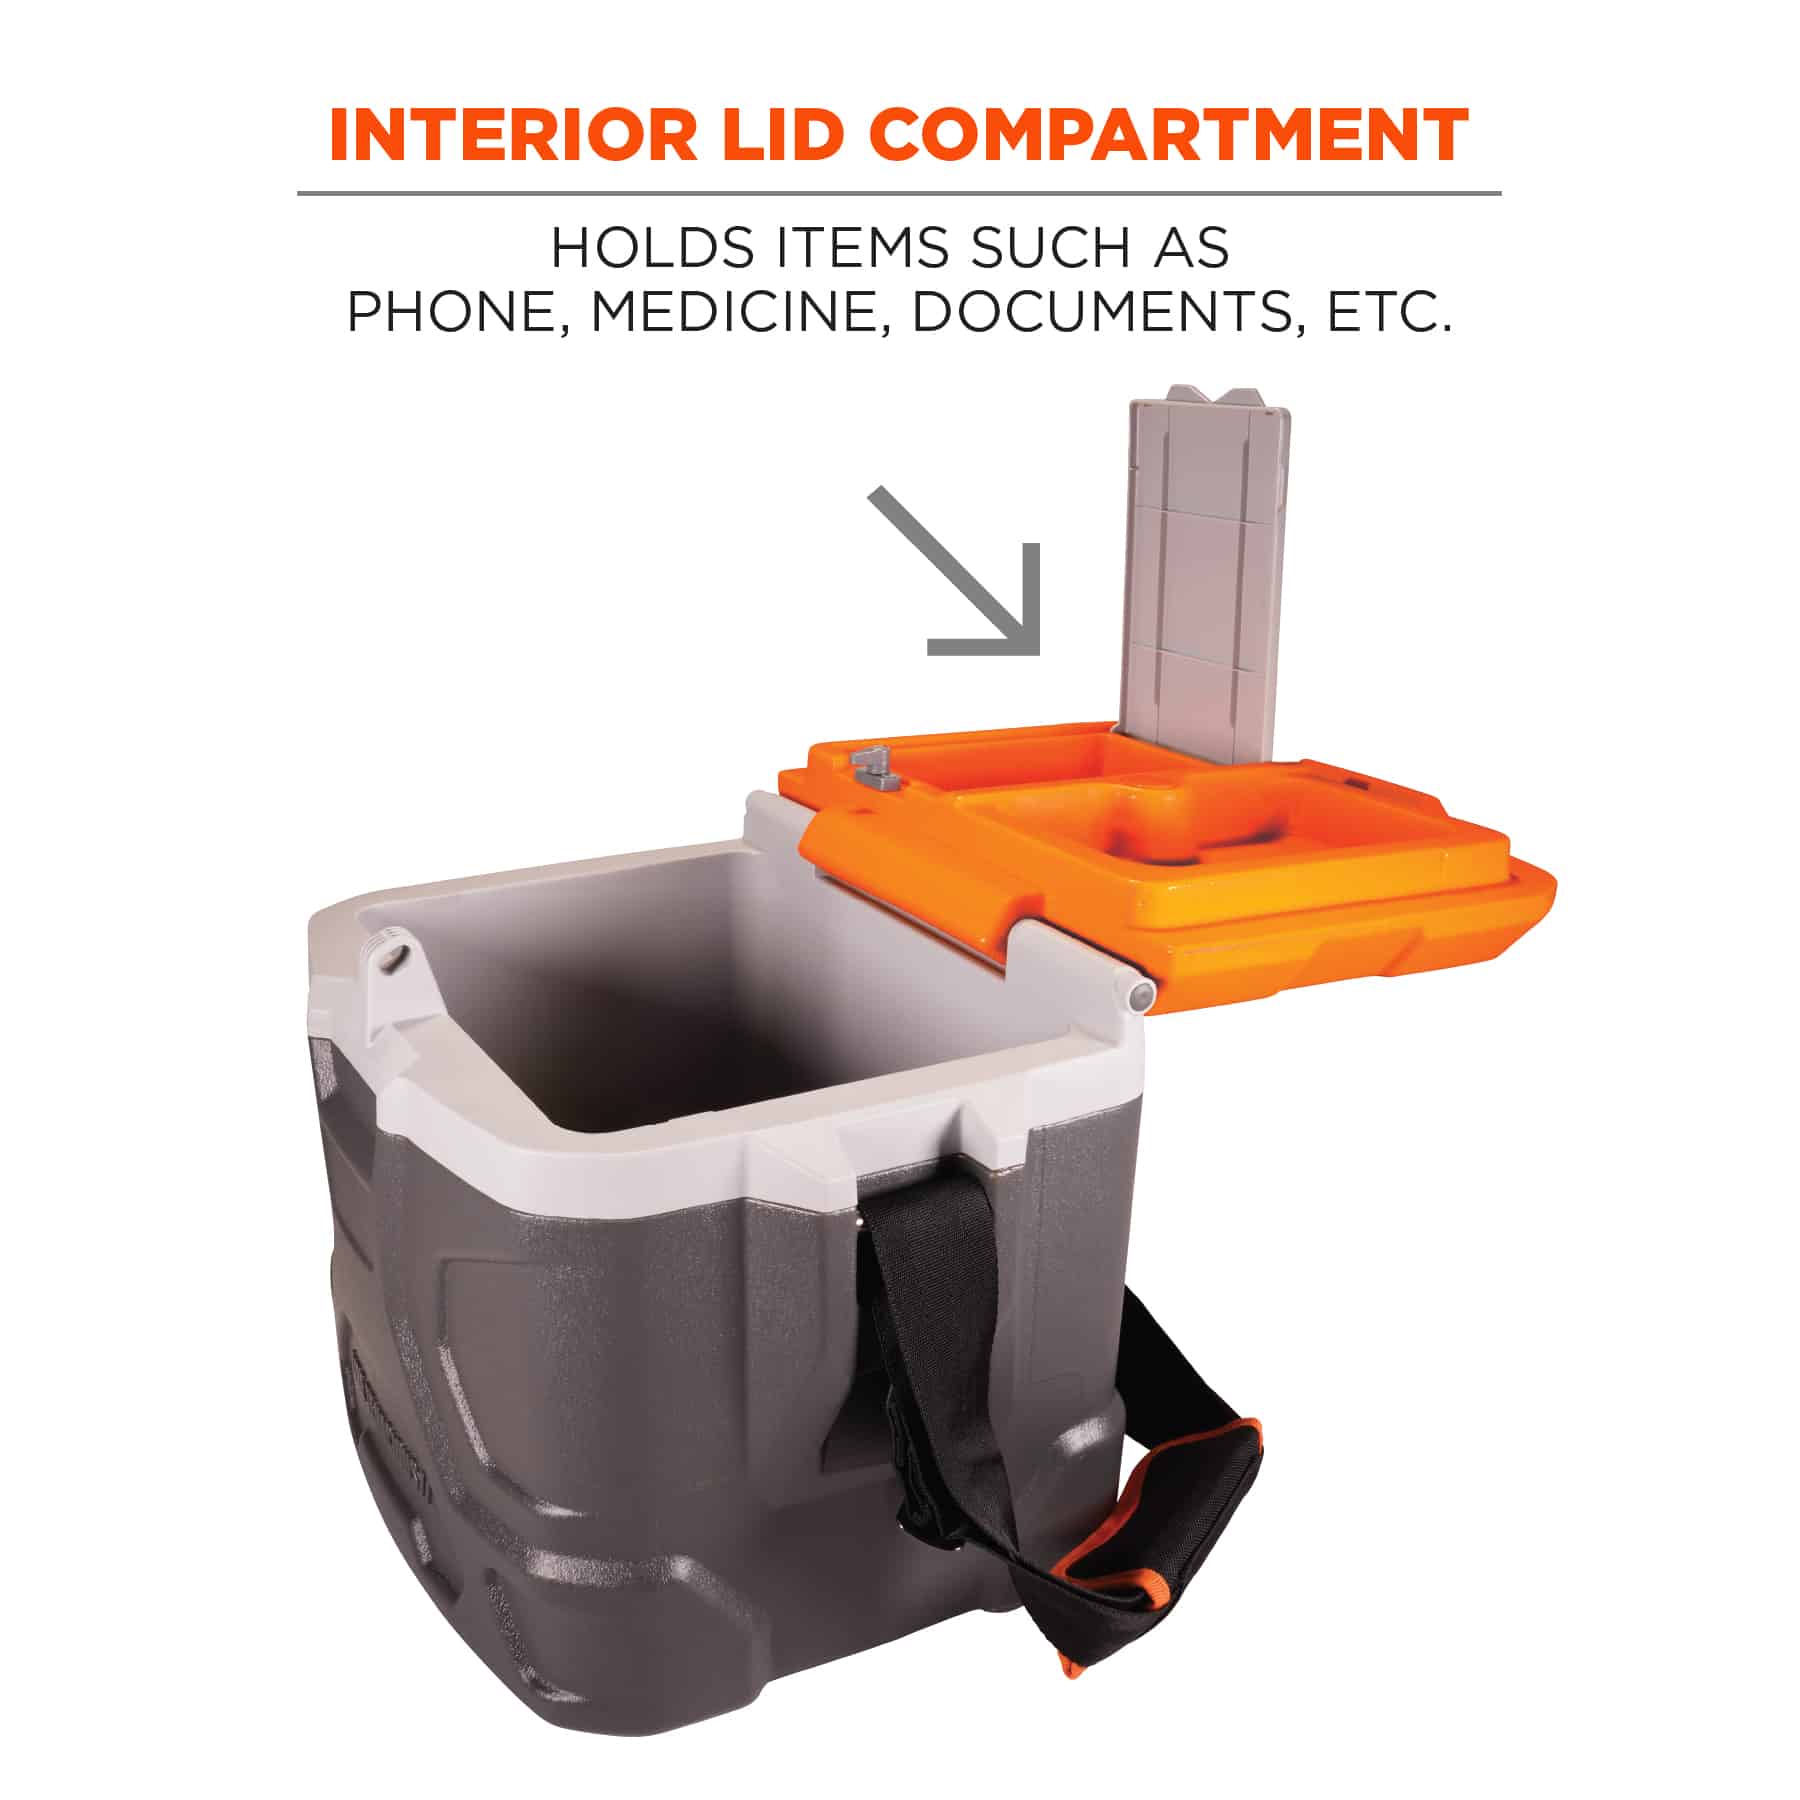 Ergodyne Chill-Its 5170 17-Quart Industrial Hard-Sided Cooler from Columbia Safety